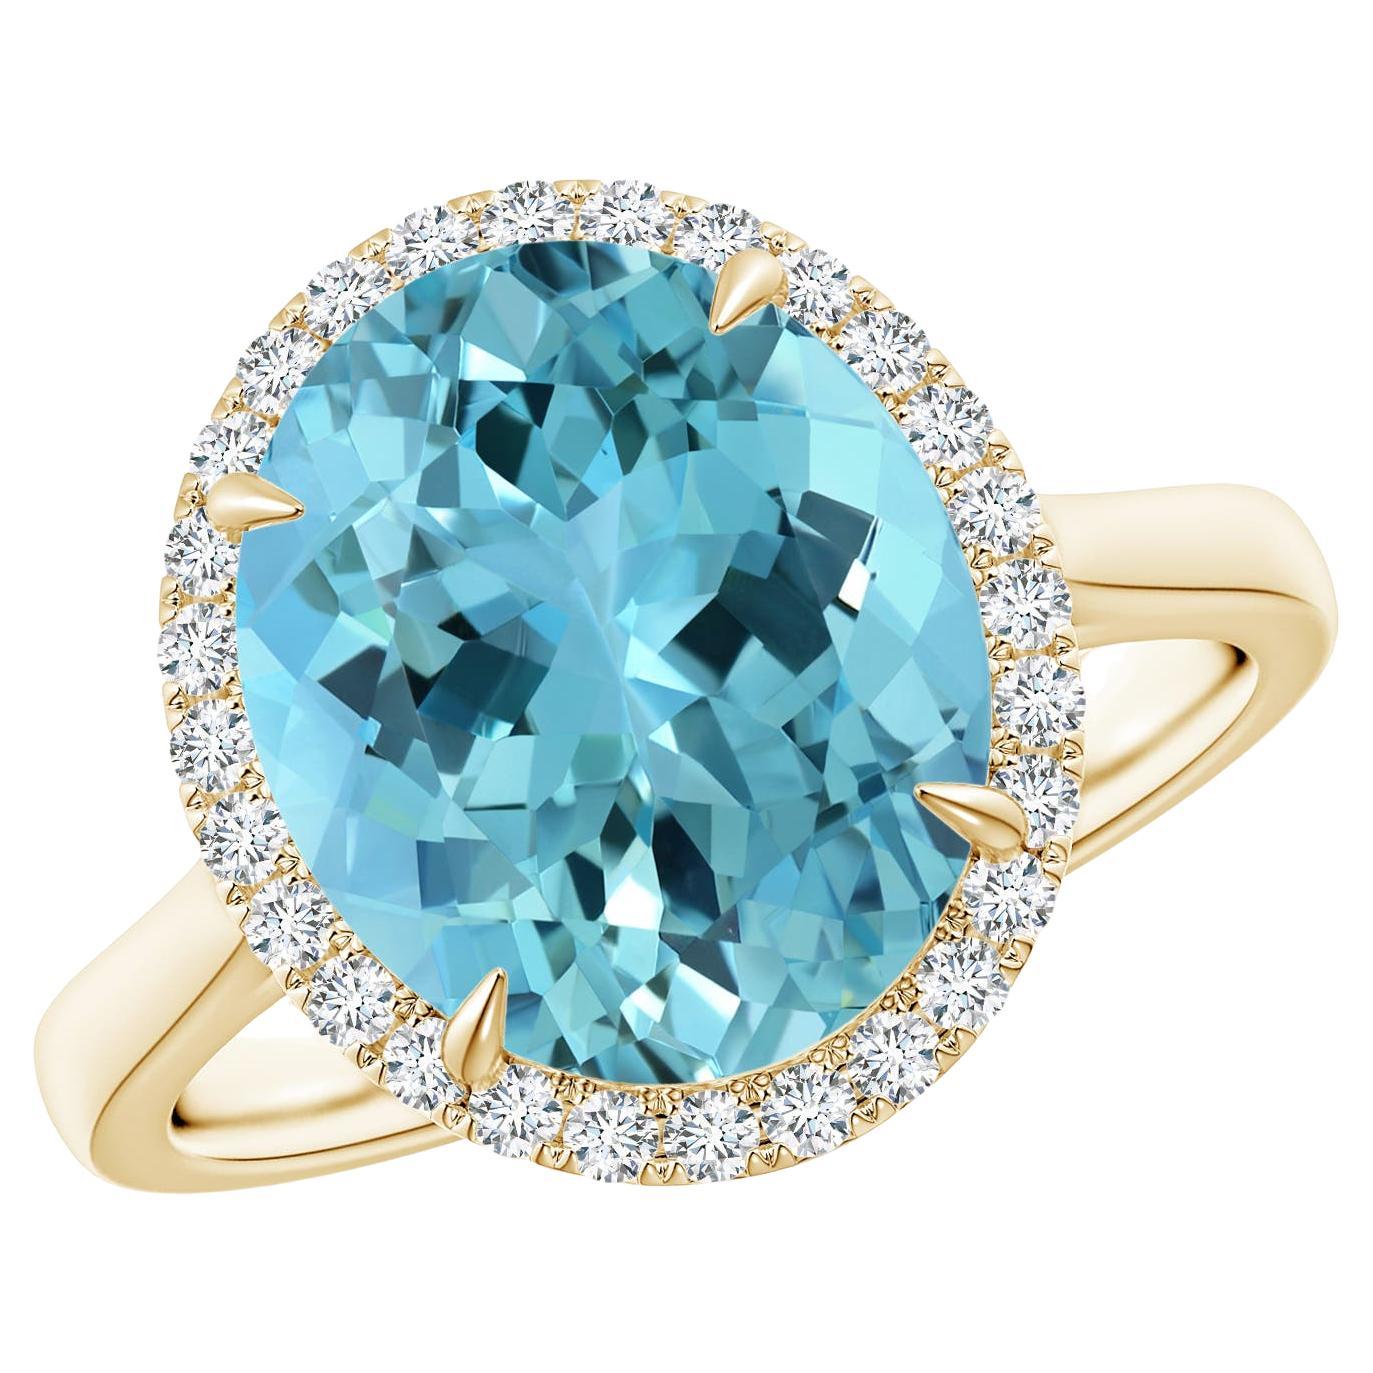 For Sale:  Angara Gia Certified Natural Aquamarine Cathedral Ring in Yellow Gold